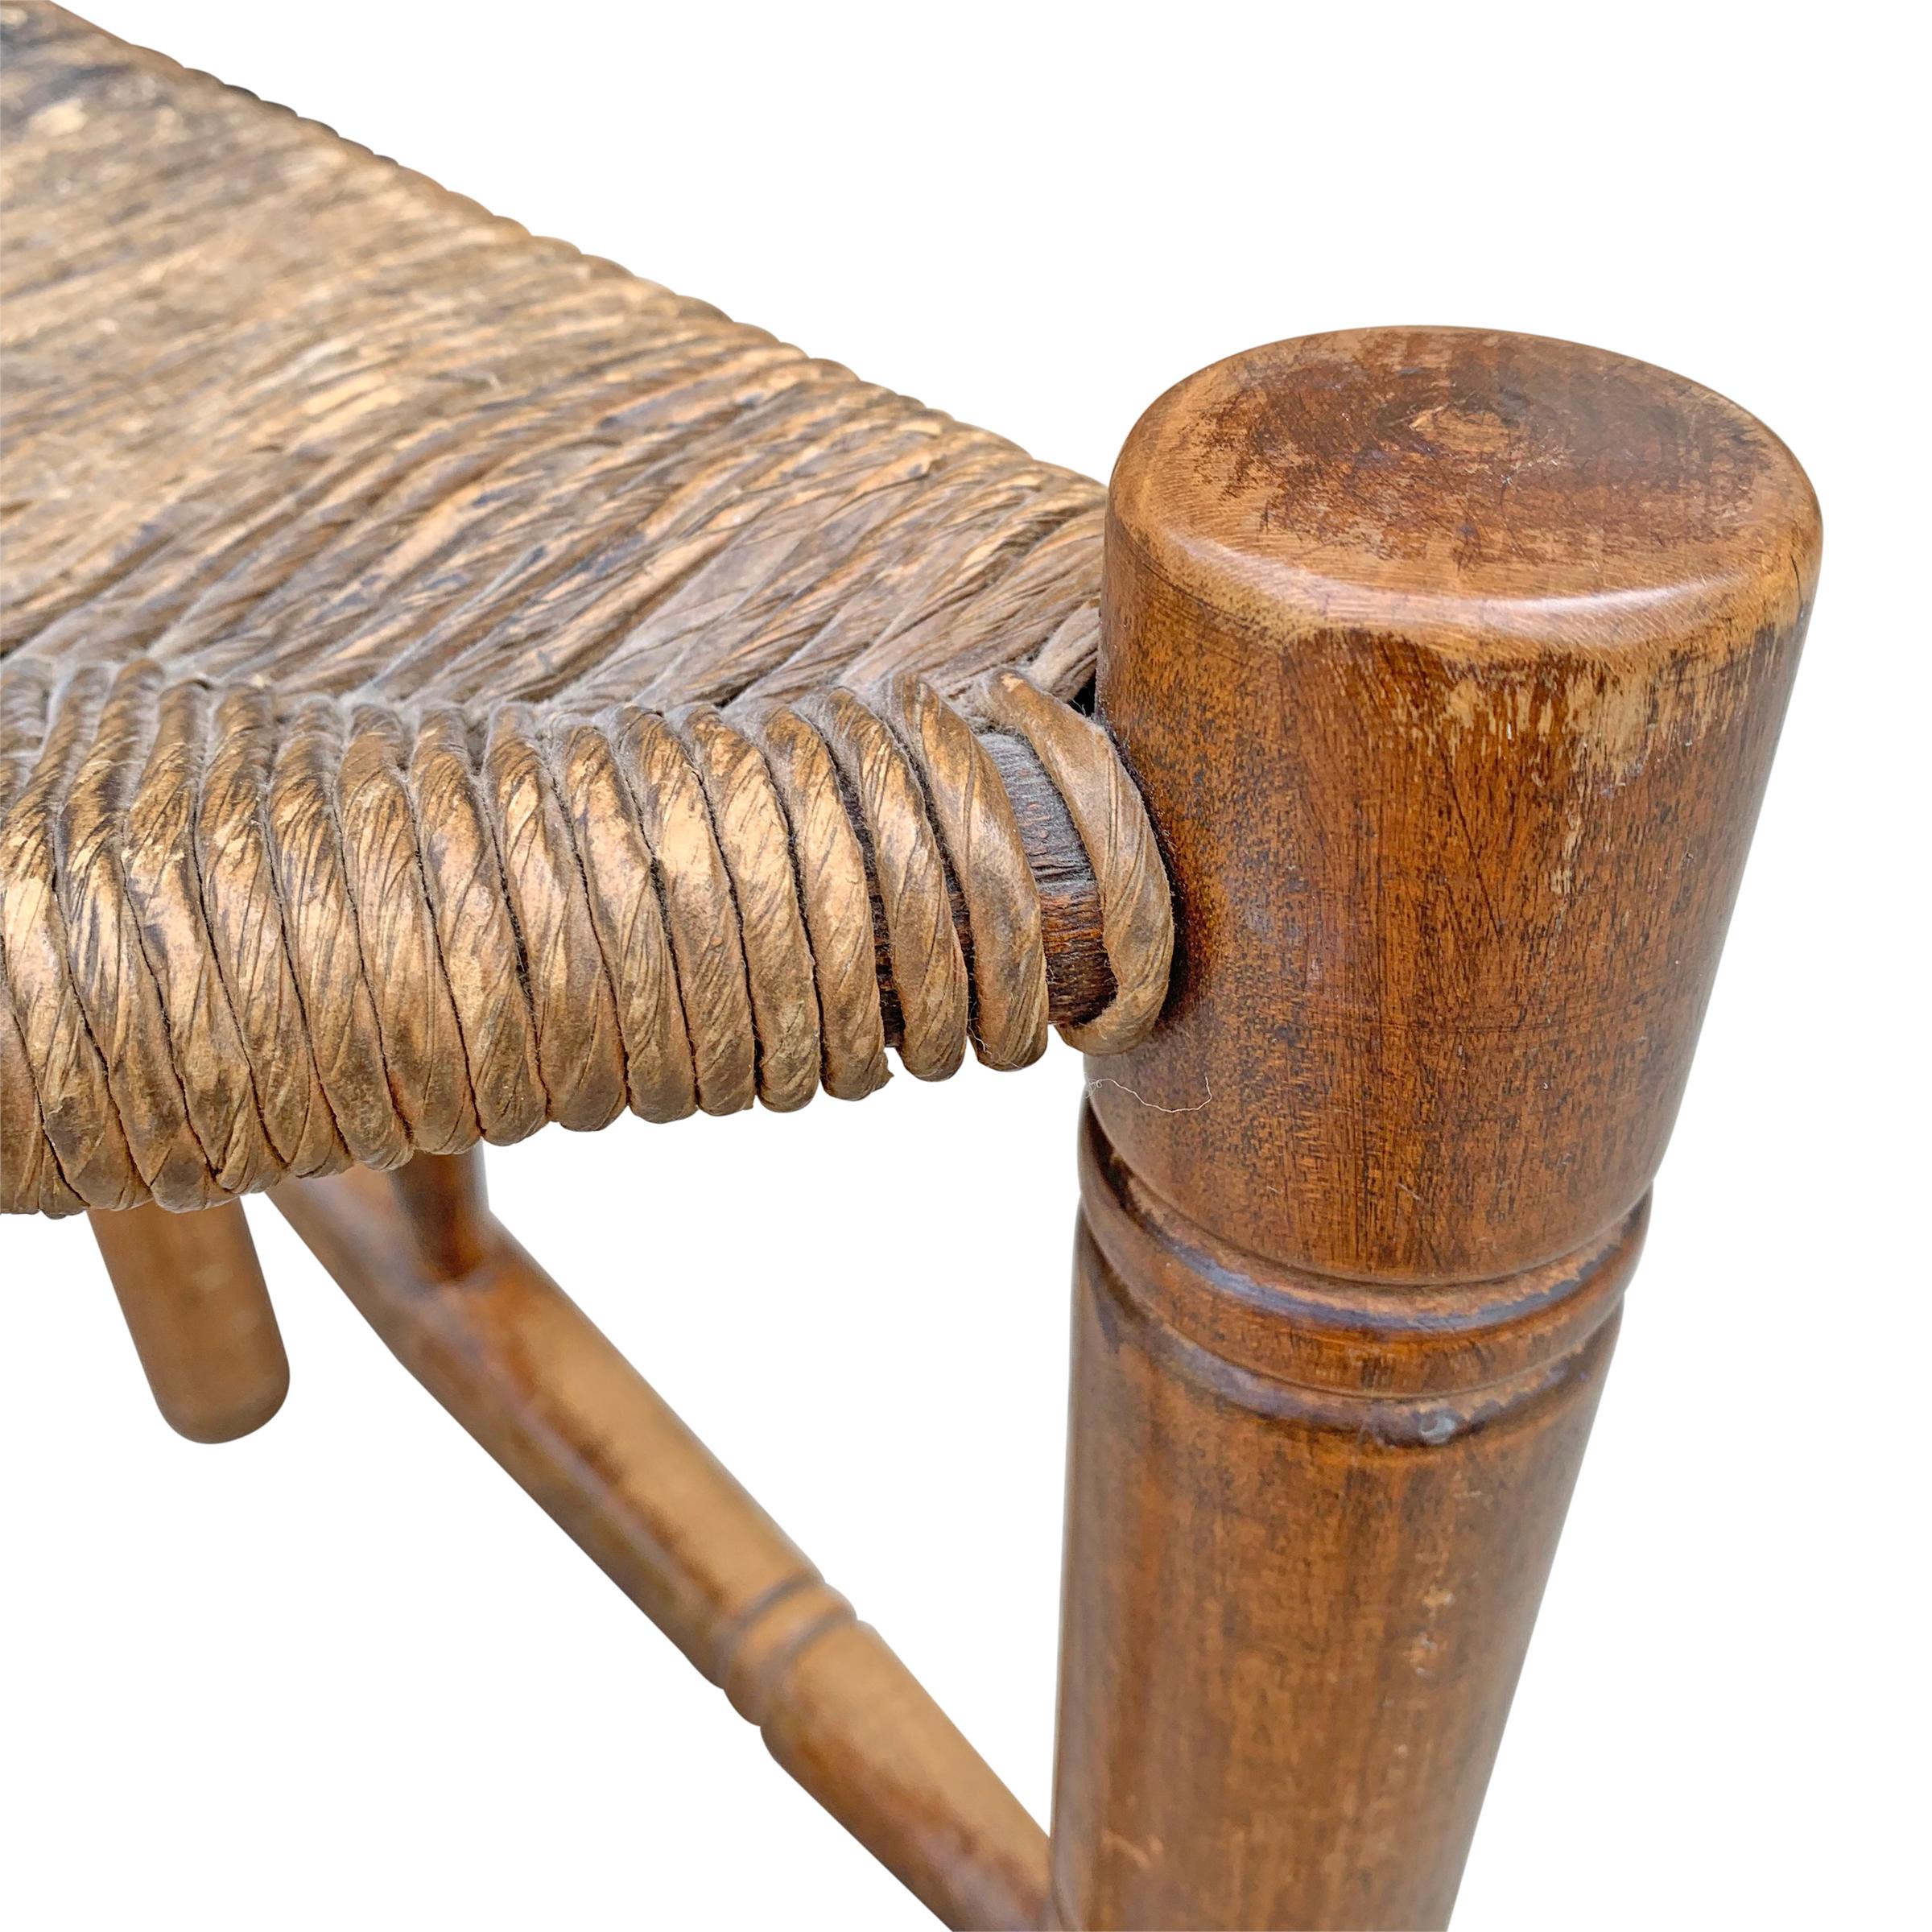 20th Century Three-Legged Stool with a Woven Rush Seat by Wallace Nutting